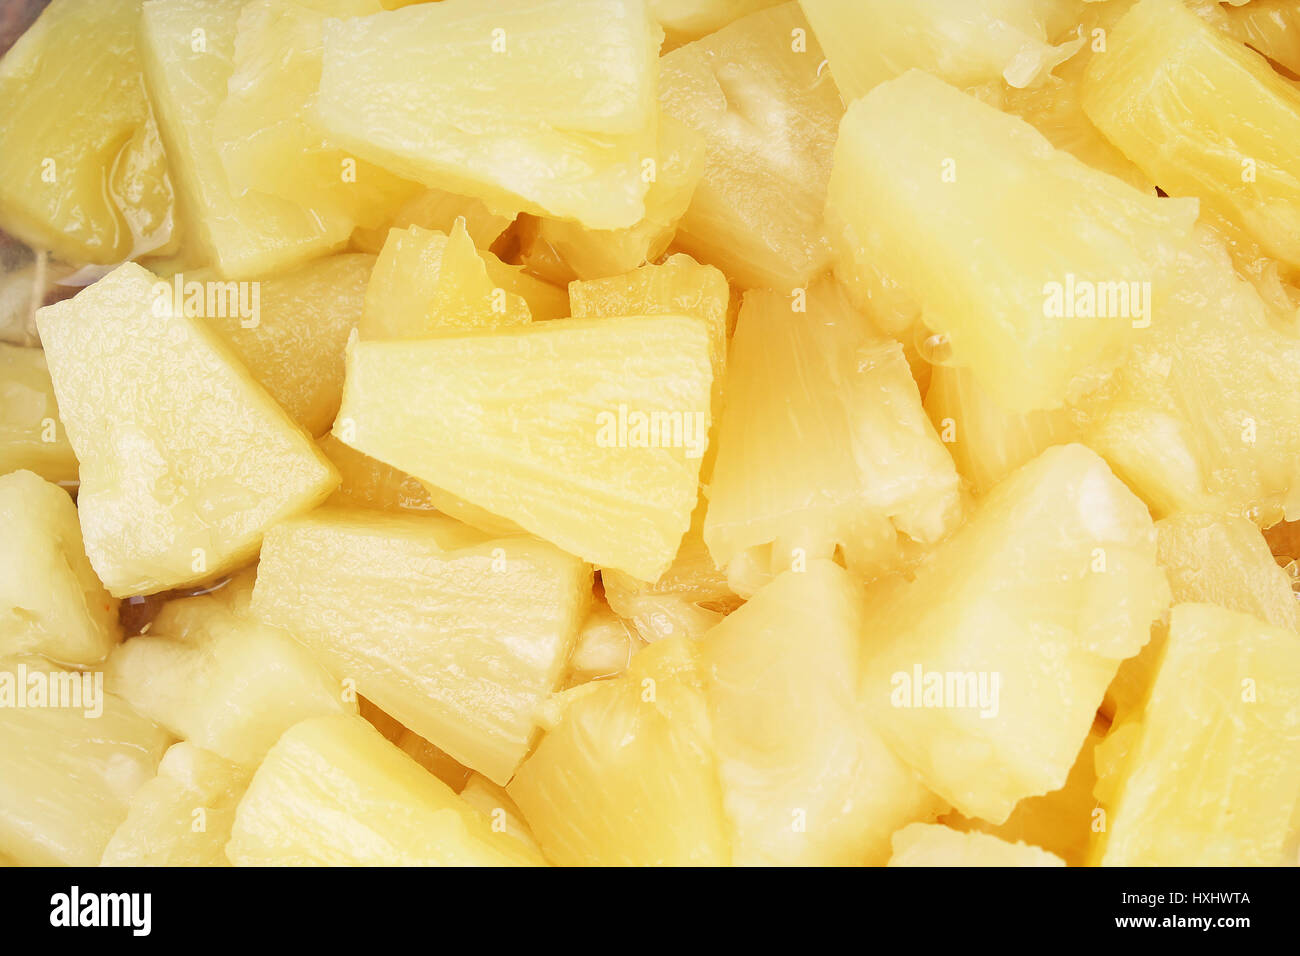 Pineapple slices as background. Yellow pineapples texture pattern. Stock Photo